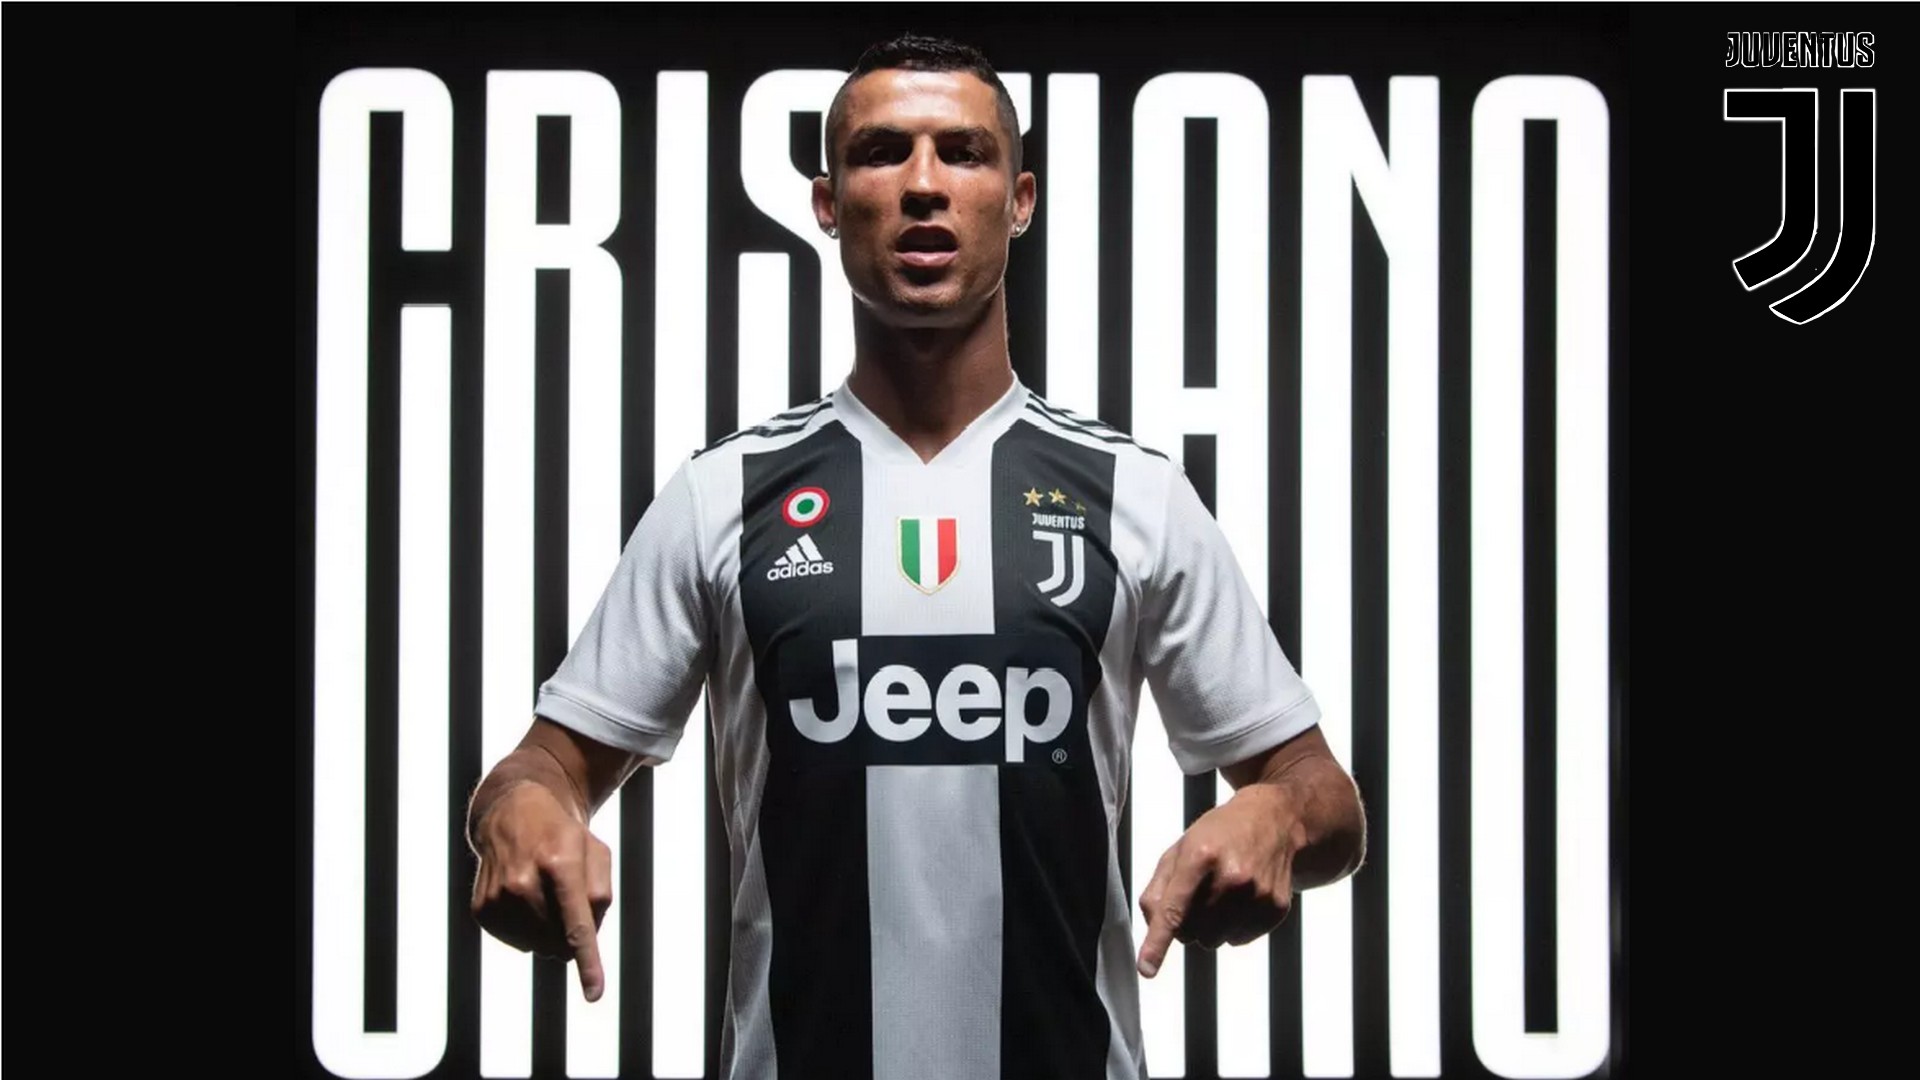 Ronaldo 7 Juventus HD Wallpapers With Resolution 1920X1080 pixel. You can make this wallpaper for your Mac or Windows Desktop Background, iPhone, Android or Tablet and another Smartphone device for free